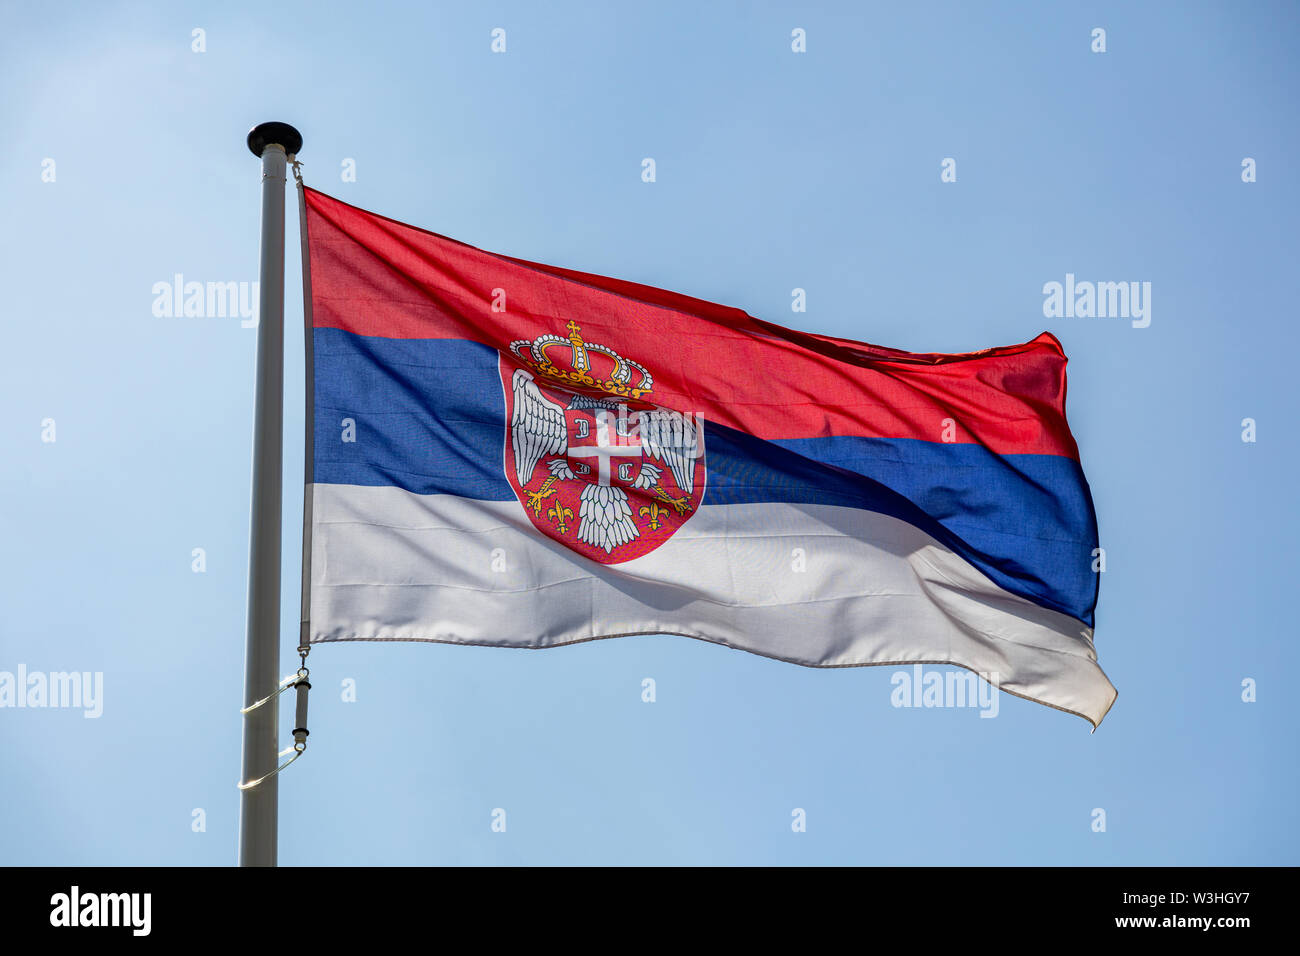 Serbia flag, National symbol waving against clear blue sky, sunny day Stock Photo